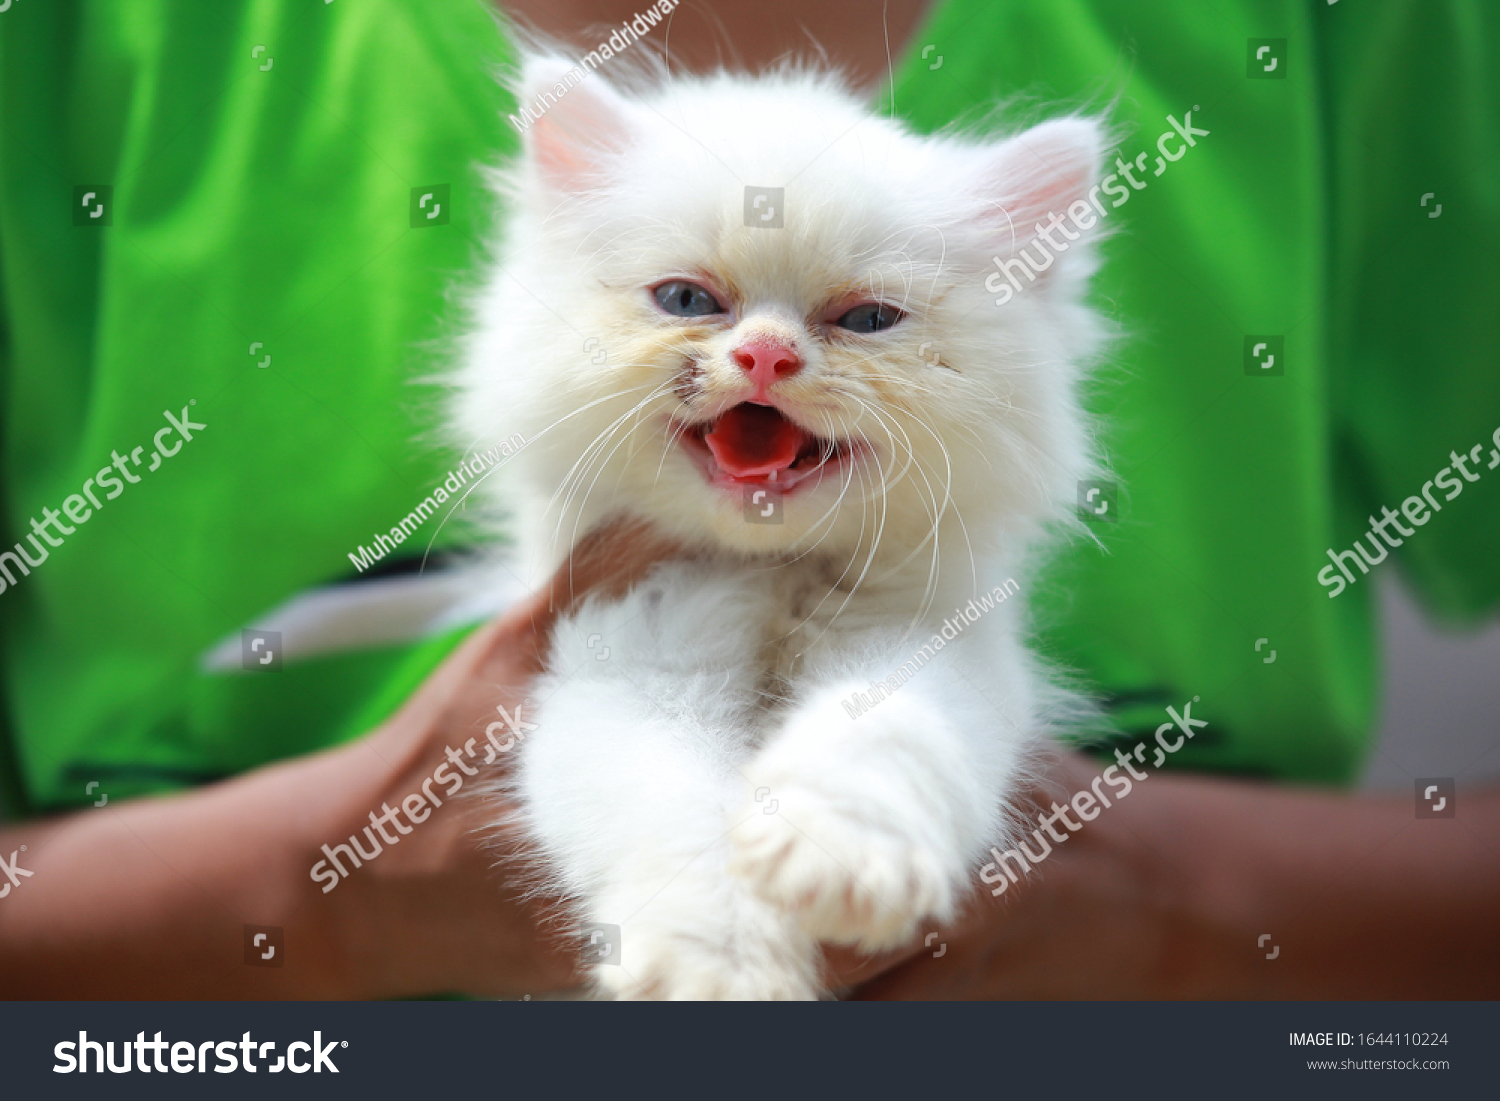 Head Photo Healthy Cat Cutties Face Stock Photo (Edit Now) 1644110224